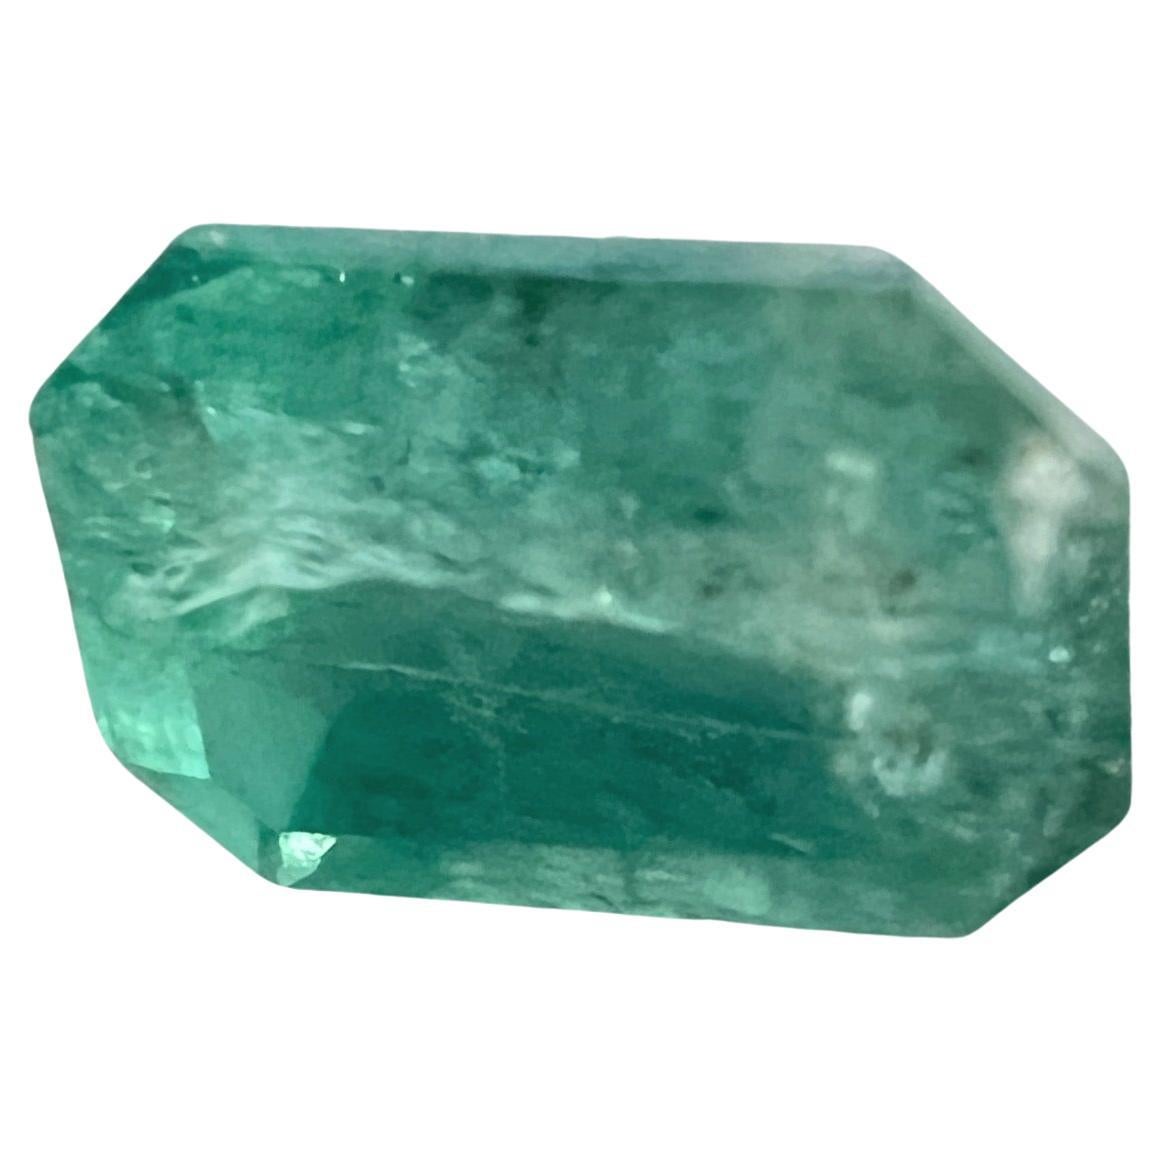 Discover the unparalleled allure of our 1.45ct Natural Emerald Cut Non-Oiled Emerald Gemstone from Nigeria—a timeless masterpiece crafted by nature's finest hand. Meticulously cut into a classic emerald shape, this stunning gemstone measures